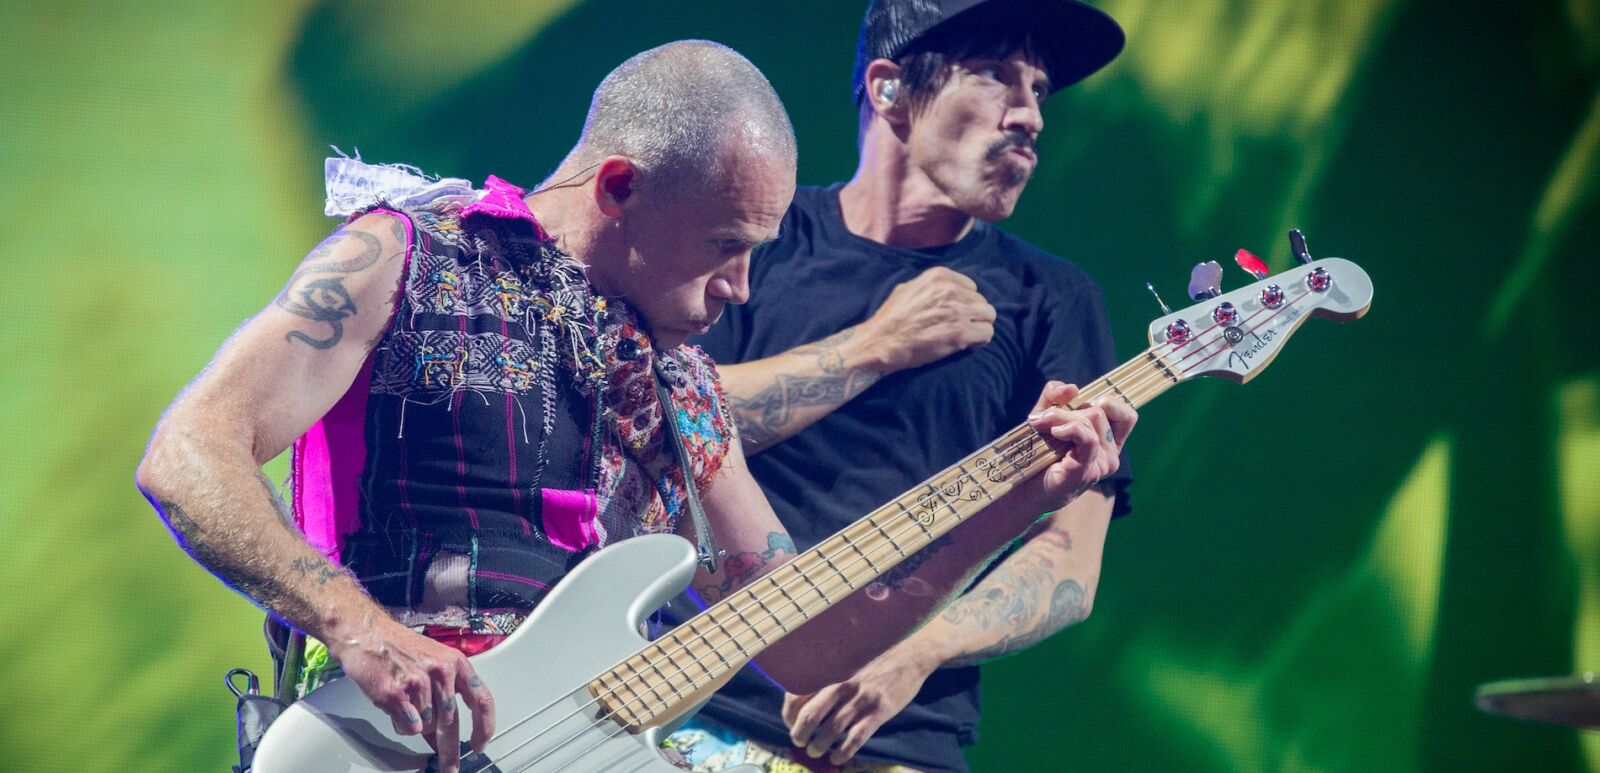 Red Hot Chili Peppers perform at BottleRock 2016 in Napa, Ca.